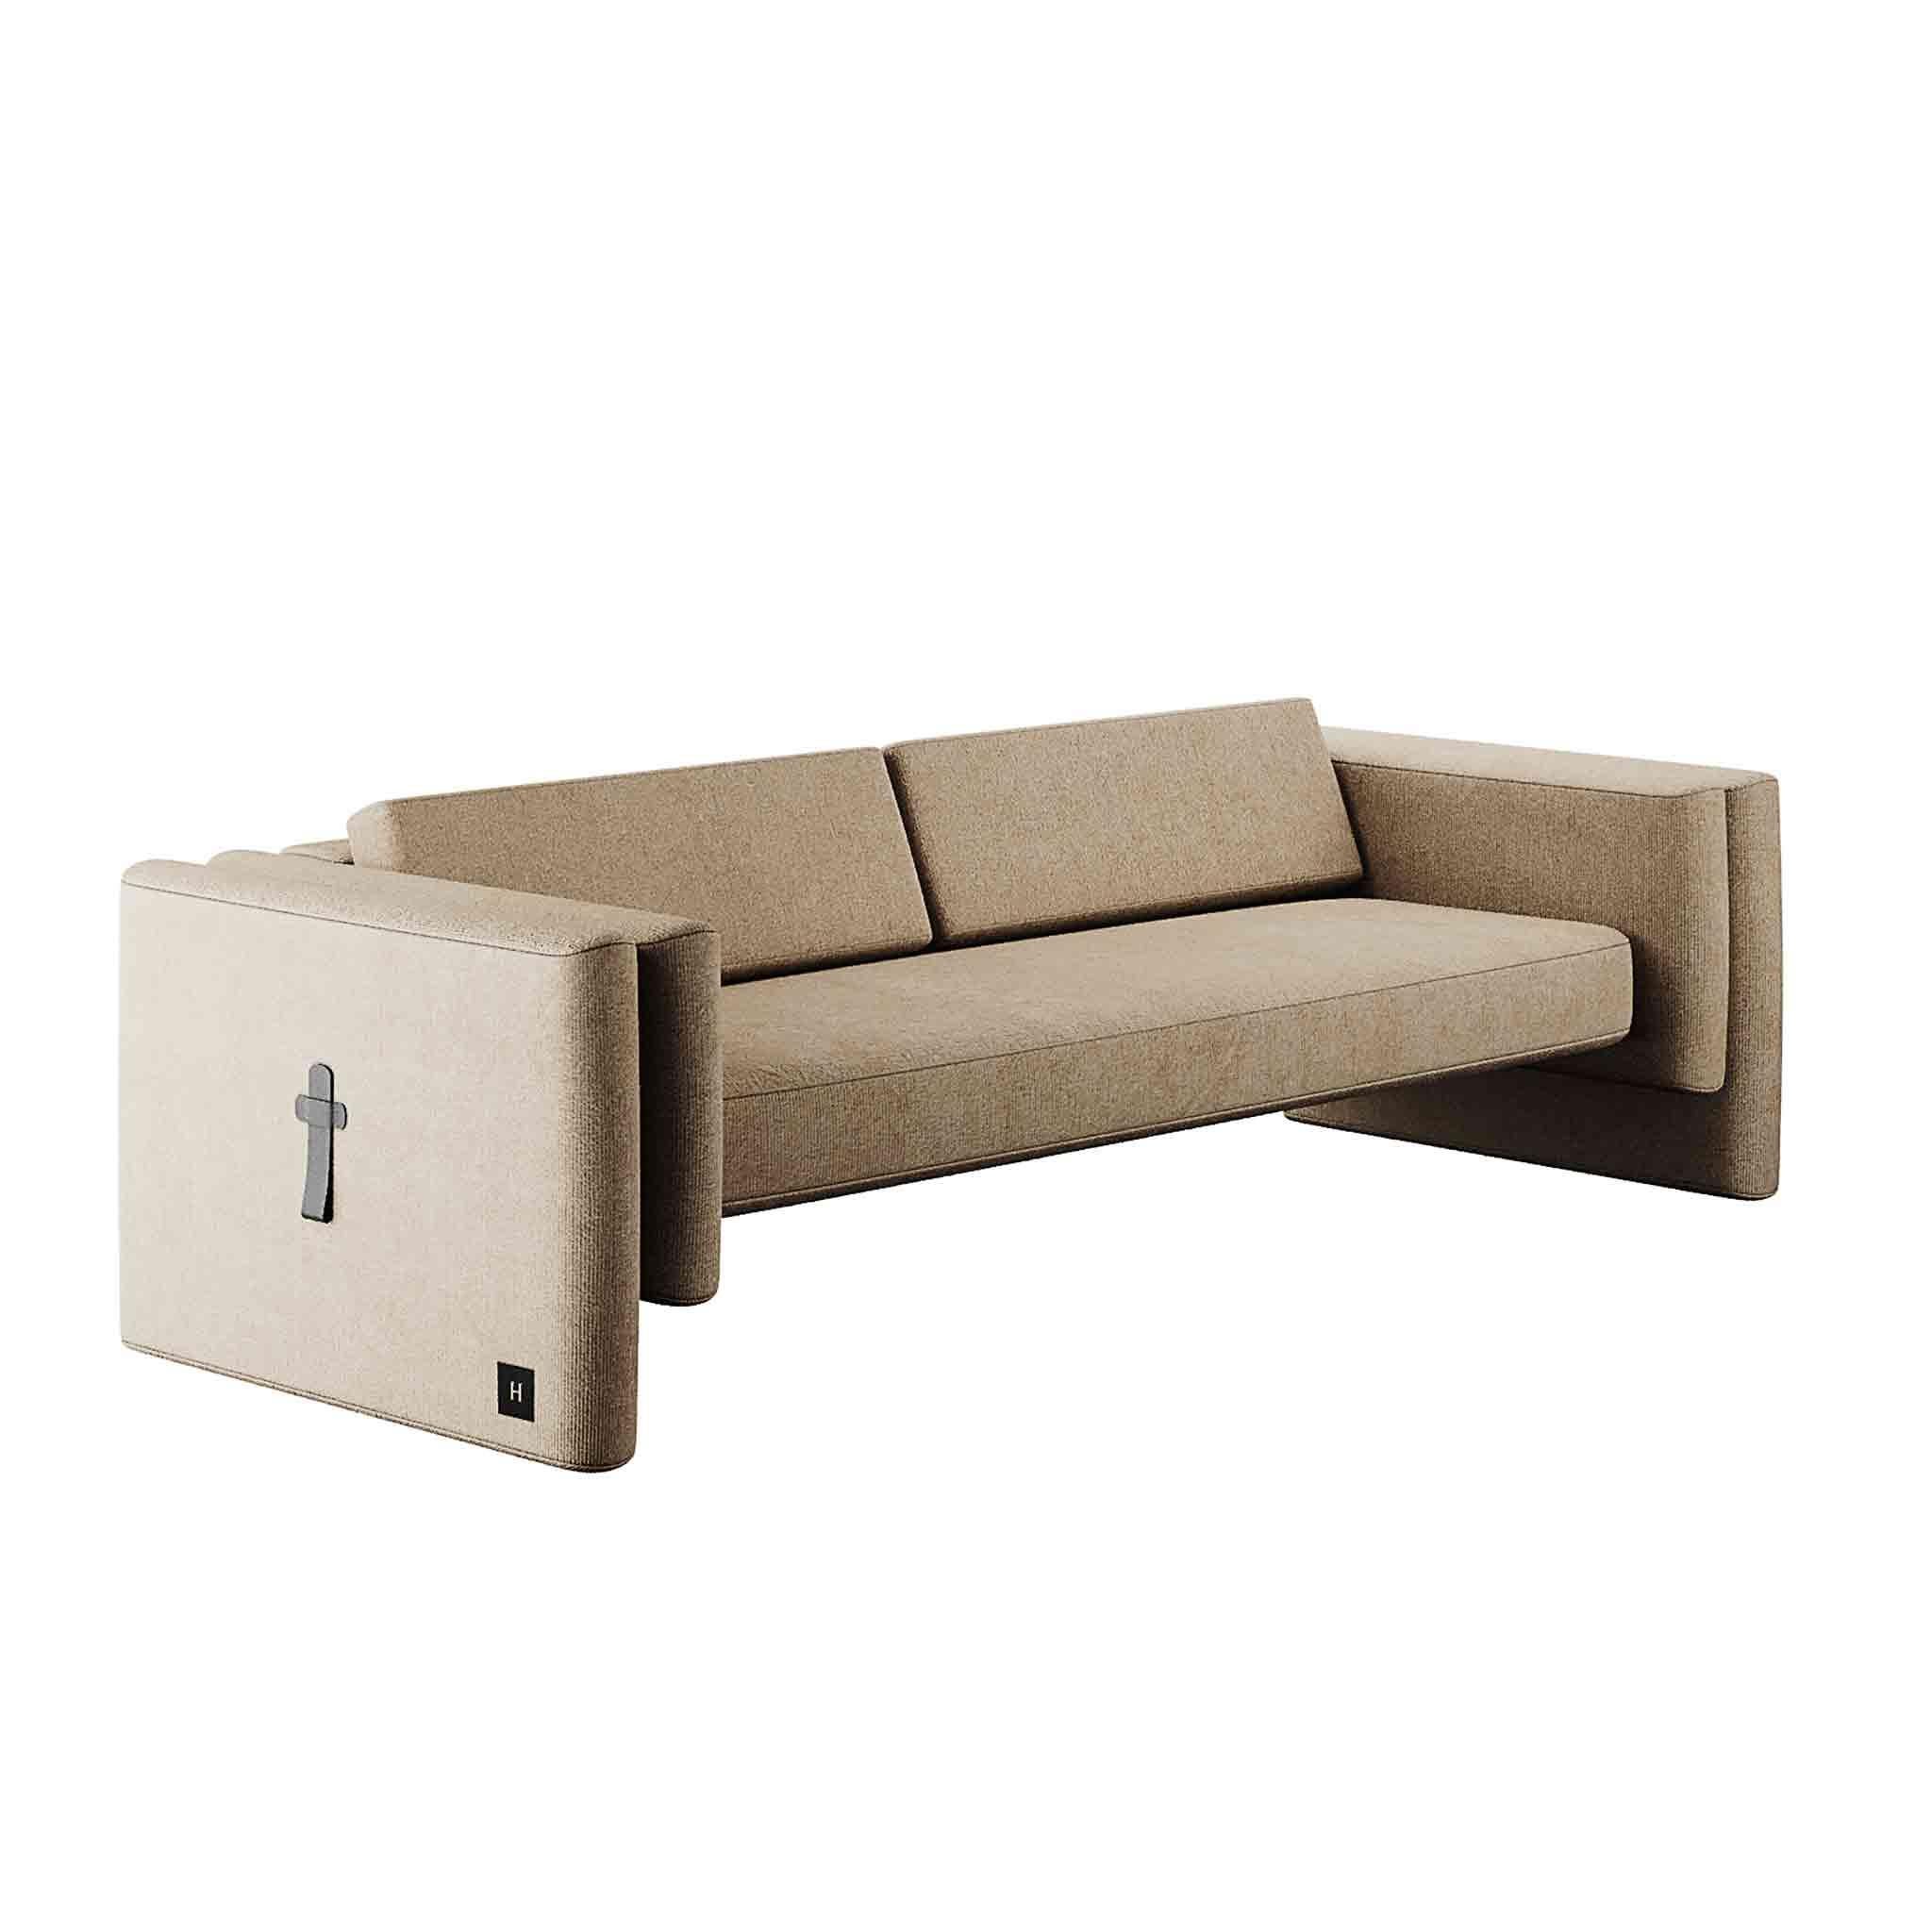 Lisola sofa is a luxury seating piece. An eclectic sofa created by the most refined design with delicate materials makes it an authentic luxury design piece. It fits perfectly in a contemporary living room and a luxury hotel project. It is inviting